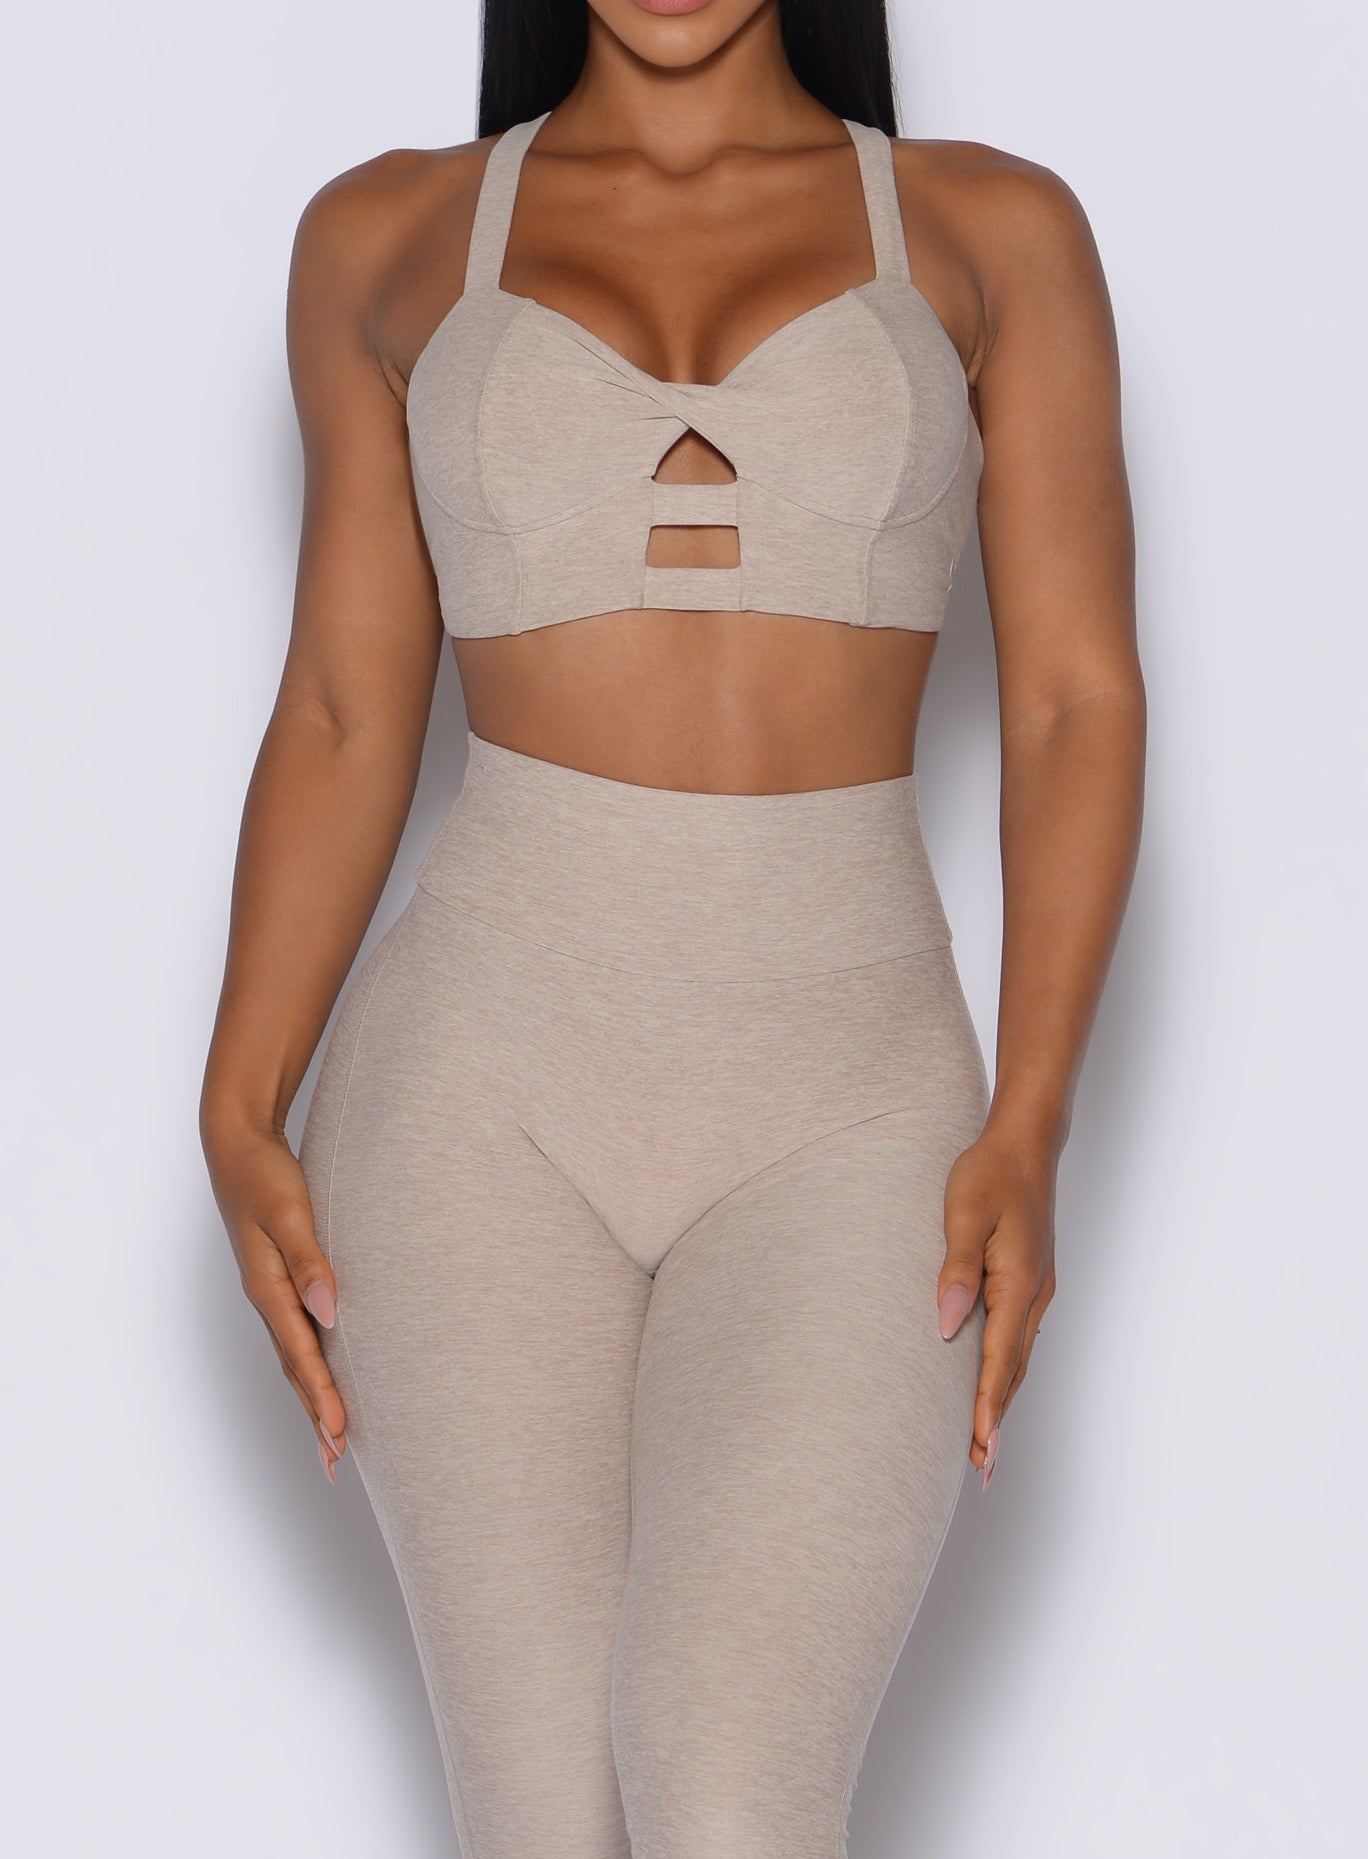 front profile view of a model wearing our core set bra in taupe color along with the matching leggings